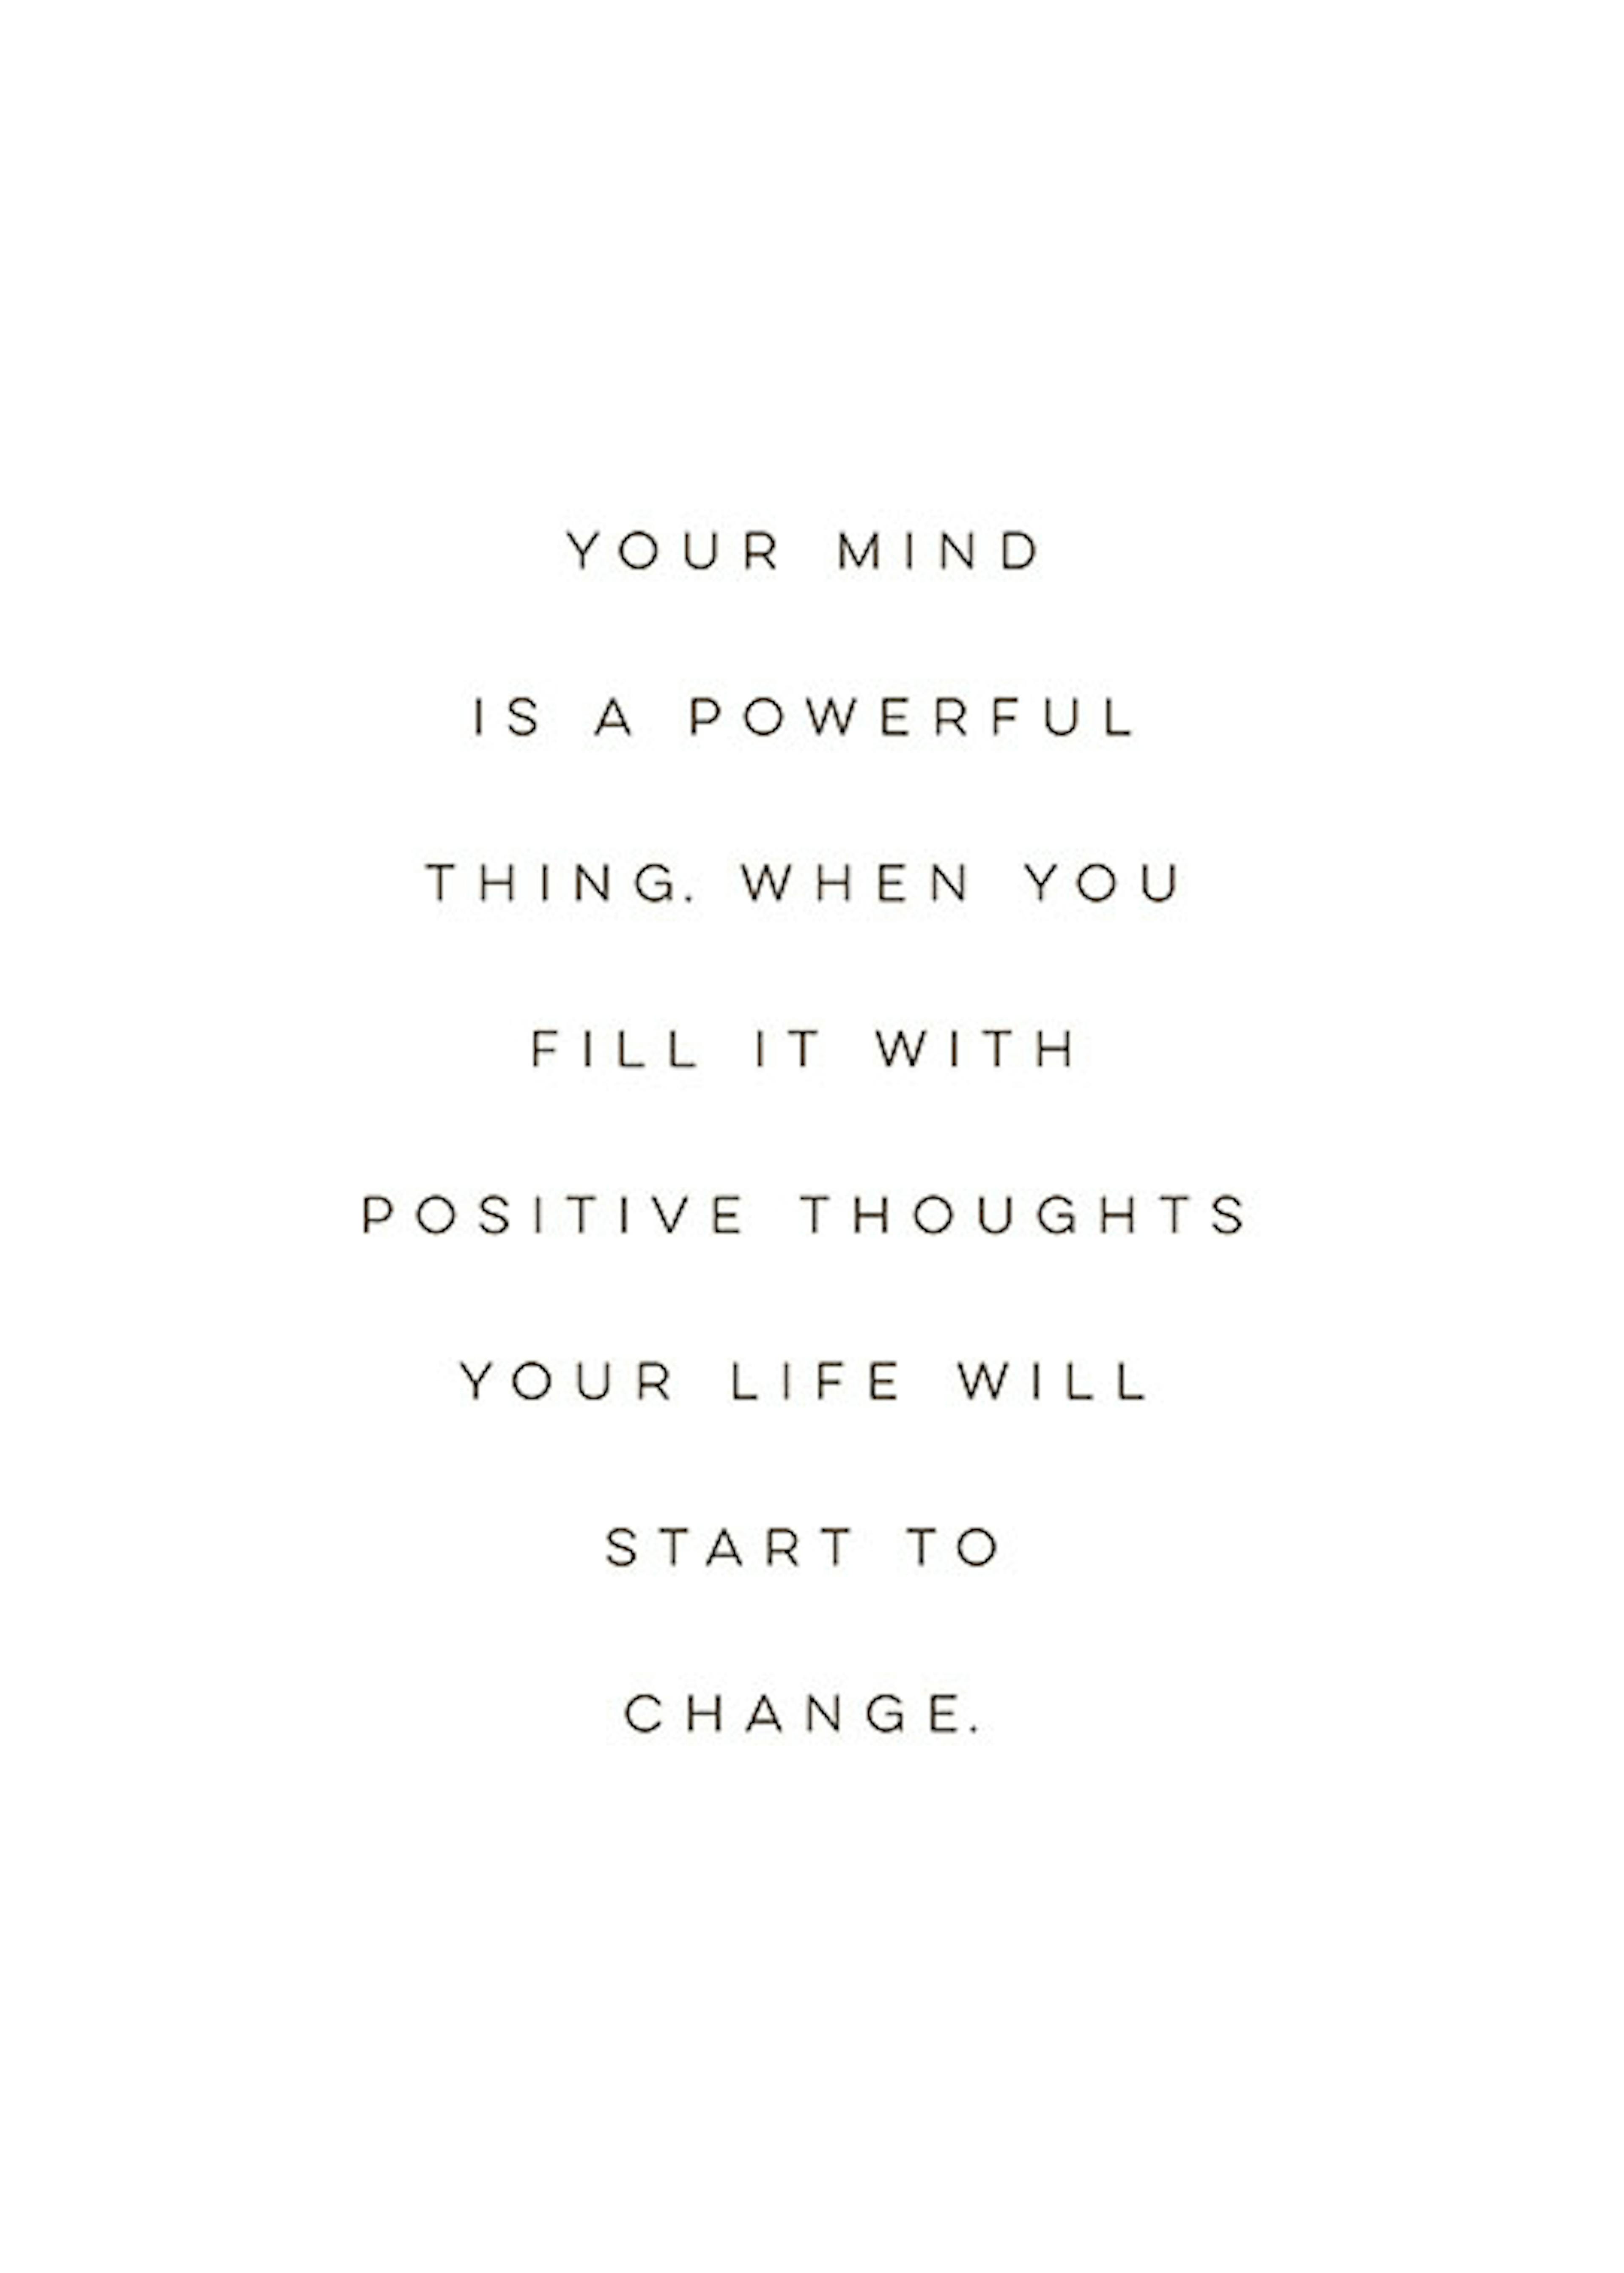 Your mind is a powerful thing plakat.